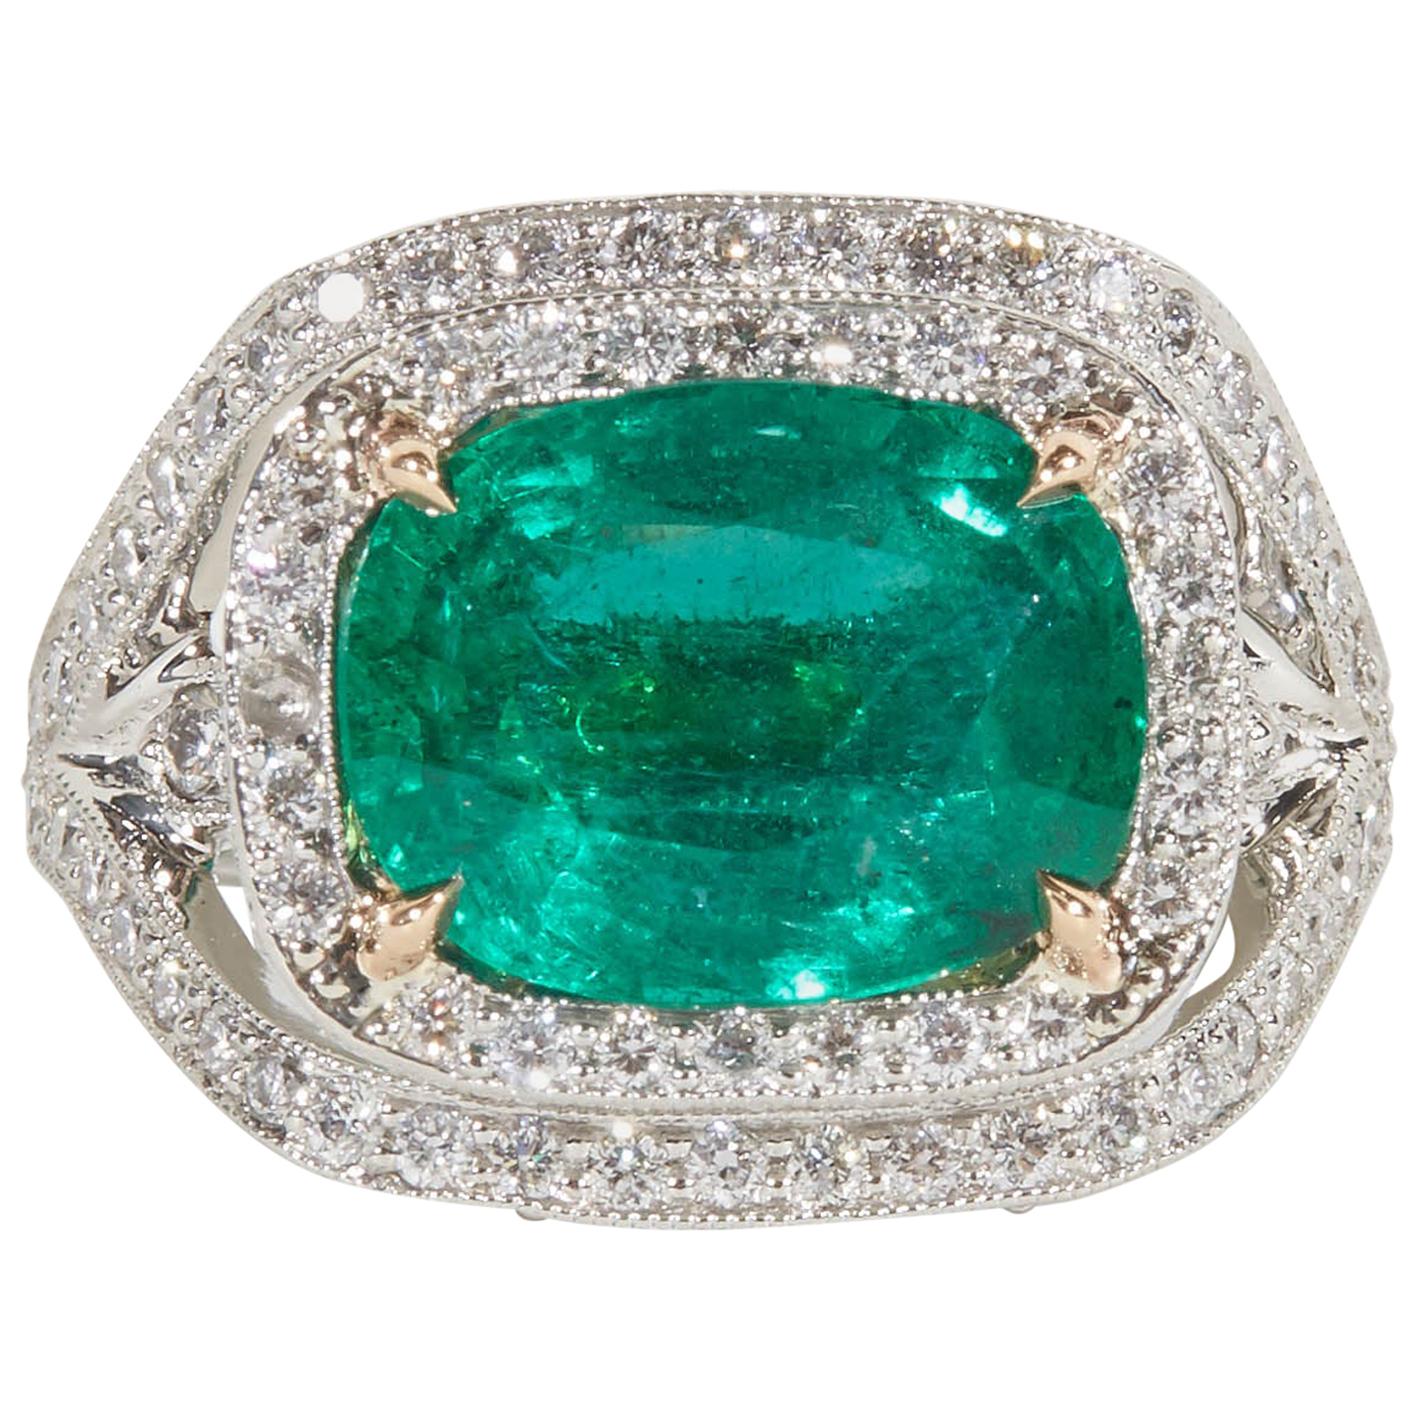 Are diamonds more expensive than emeralds?